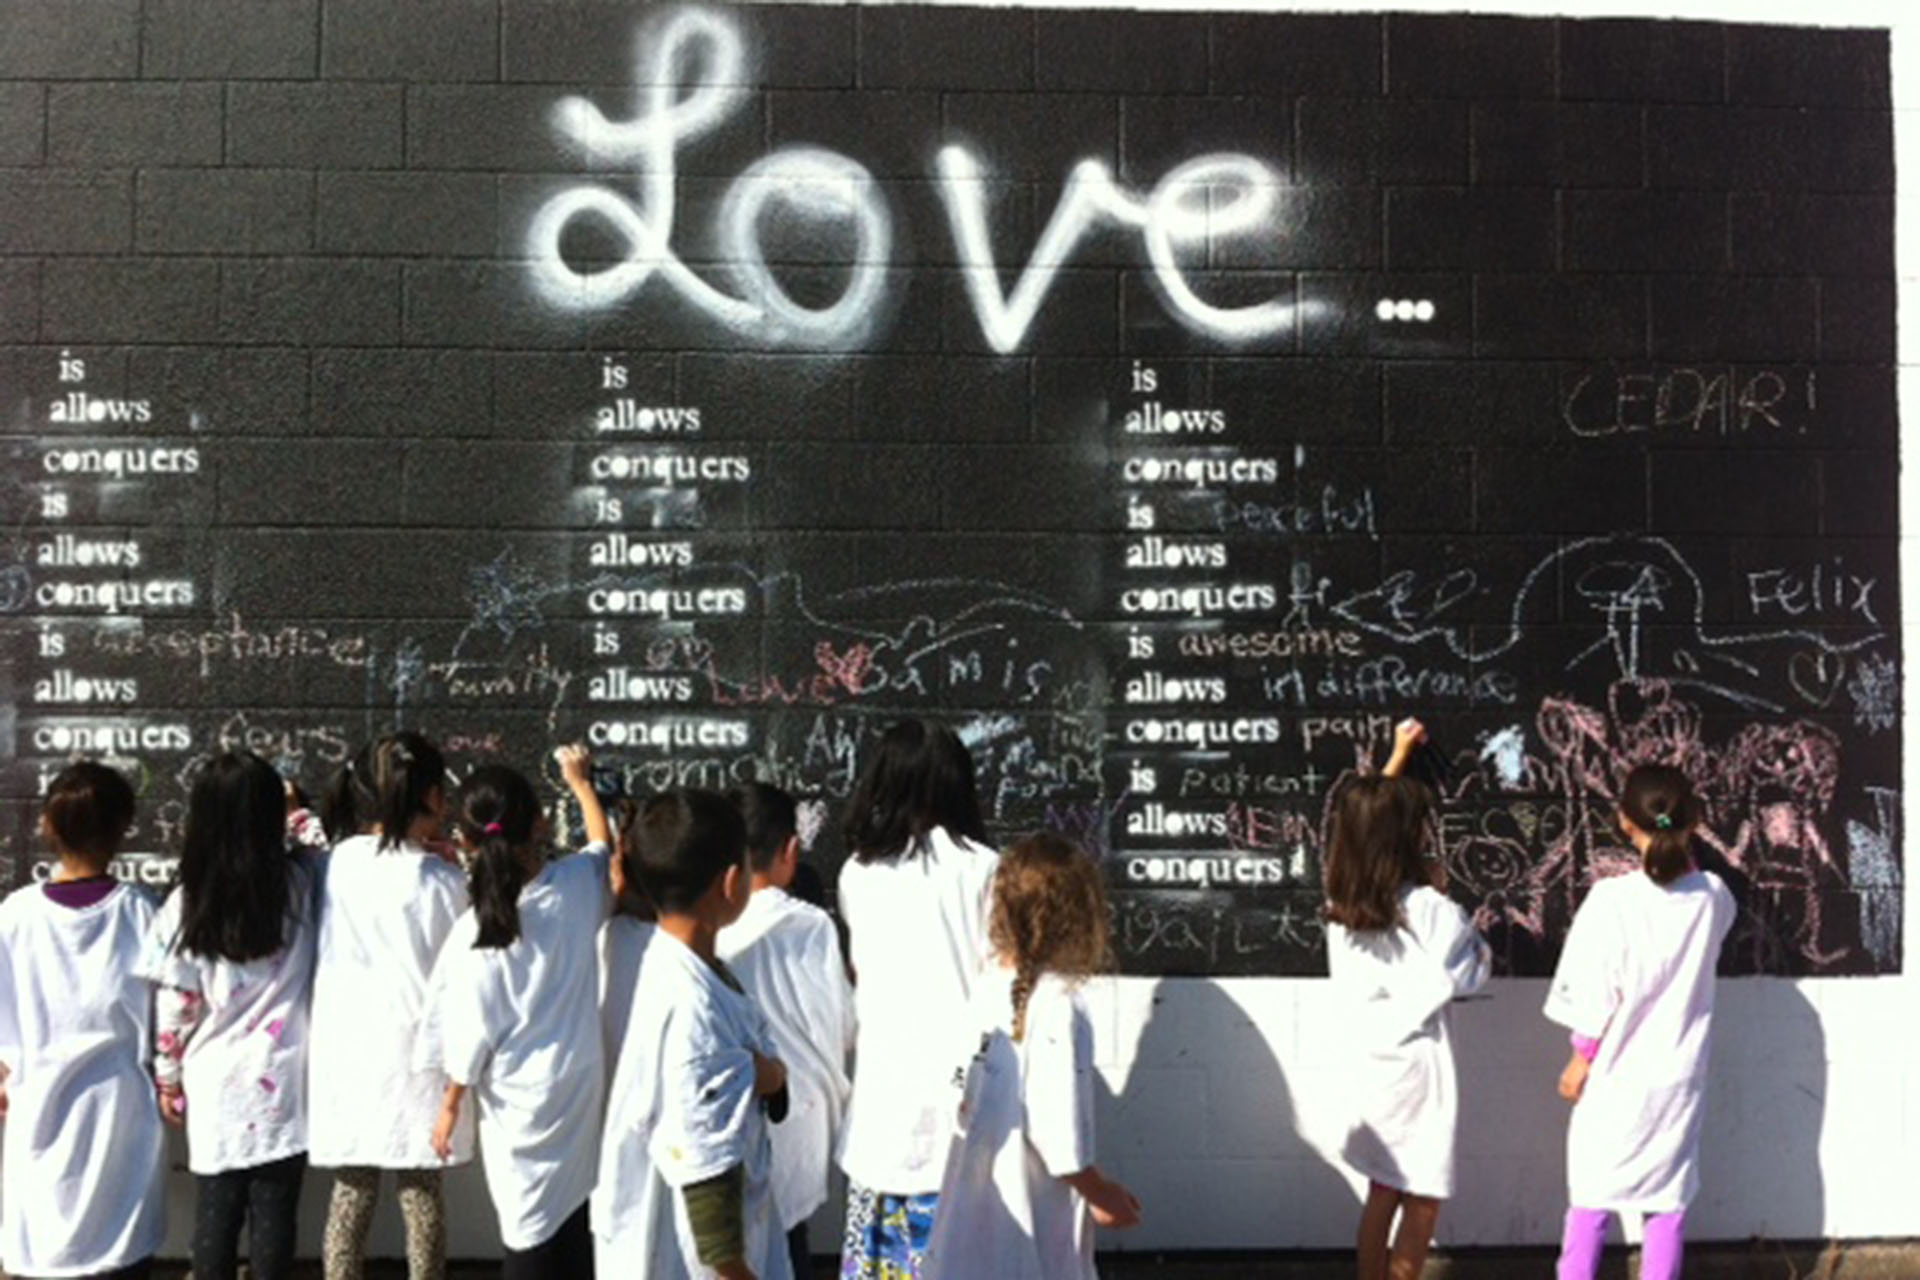 SEPTEMBER 2014: Our Chalk Walls debuted for Culture Days 2014 – and Granville island visitors continue to consider what love means to them. The project was inspired by the global art movement, Before I Die.